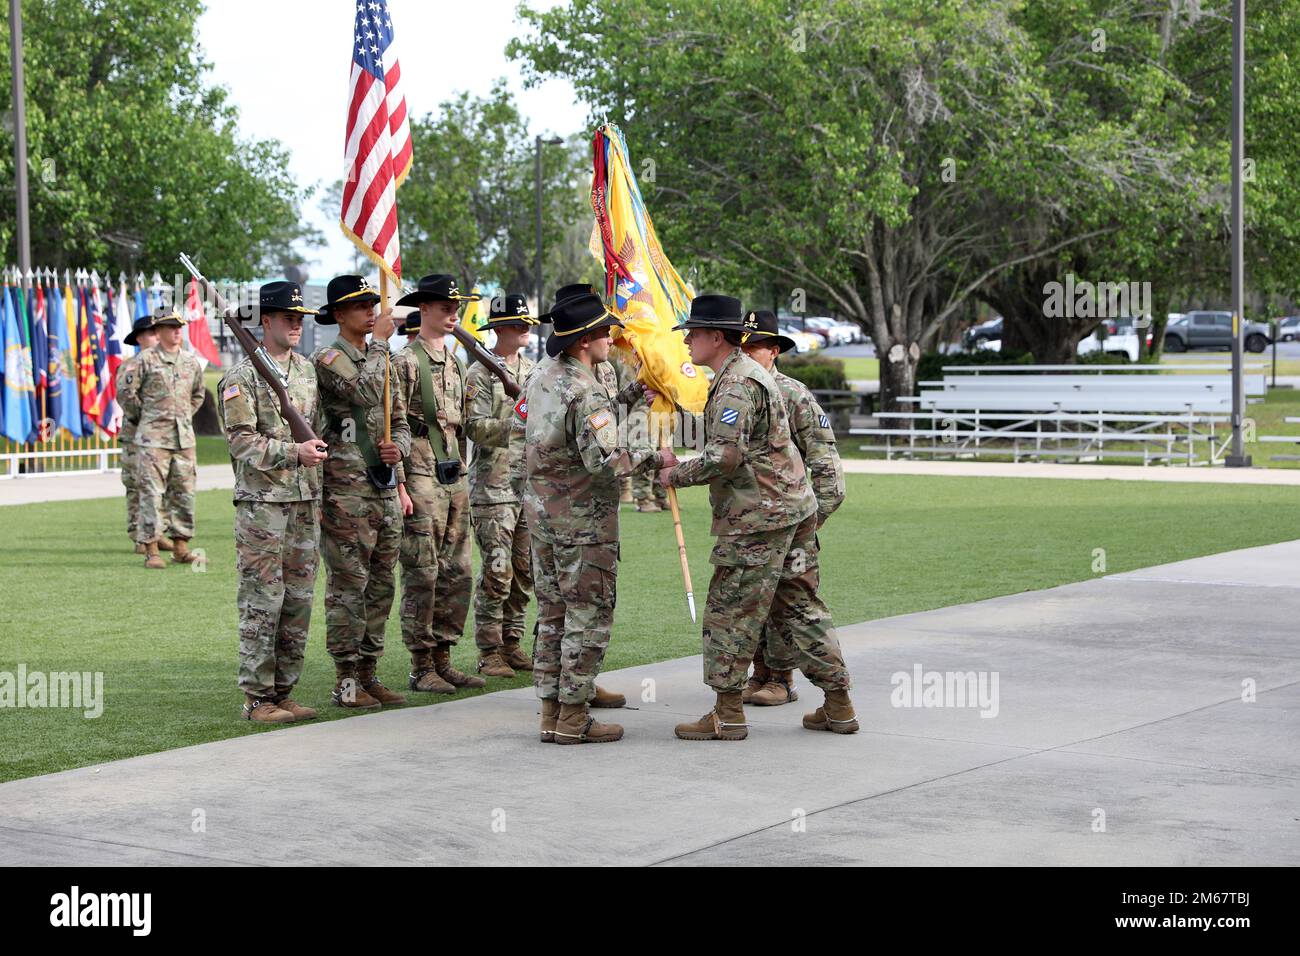 Lt. Col. Thomas Lamb, center, receives the colors from Command Sgt. Maj. Johnny Herrera-Lozano, right, and passes them to Command Sgt. Maj. Eddy Perez, left, symbolizing Perez as the new senior enlisted advisor for the 'Mustang Squadron,' 6th Squadron, 8th Cavalry Regiment, 2nd Armored Brigade Combat Team, 3rd Infantry Division, at Cashe Garden on Fort Stewart, April 14, 2022. The passing of the unit colors is a time-honored tradition that signifies the change of responsibility from one command sergeant major to the next in order to serve as the units caretaker and senior enlisted advisor to t Stock Photo